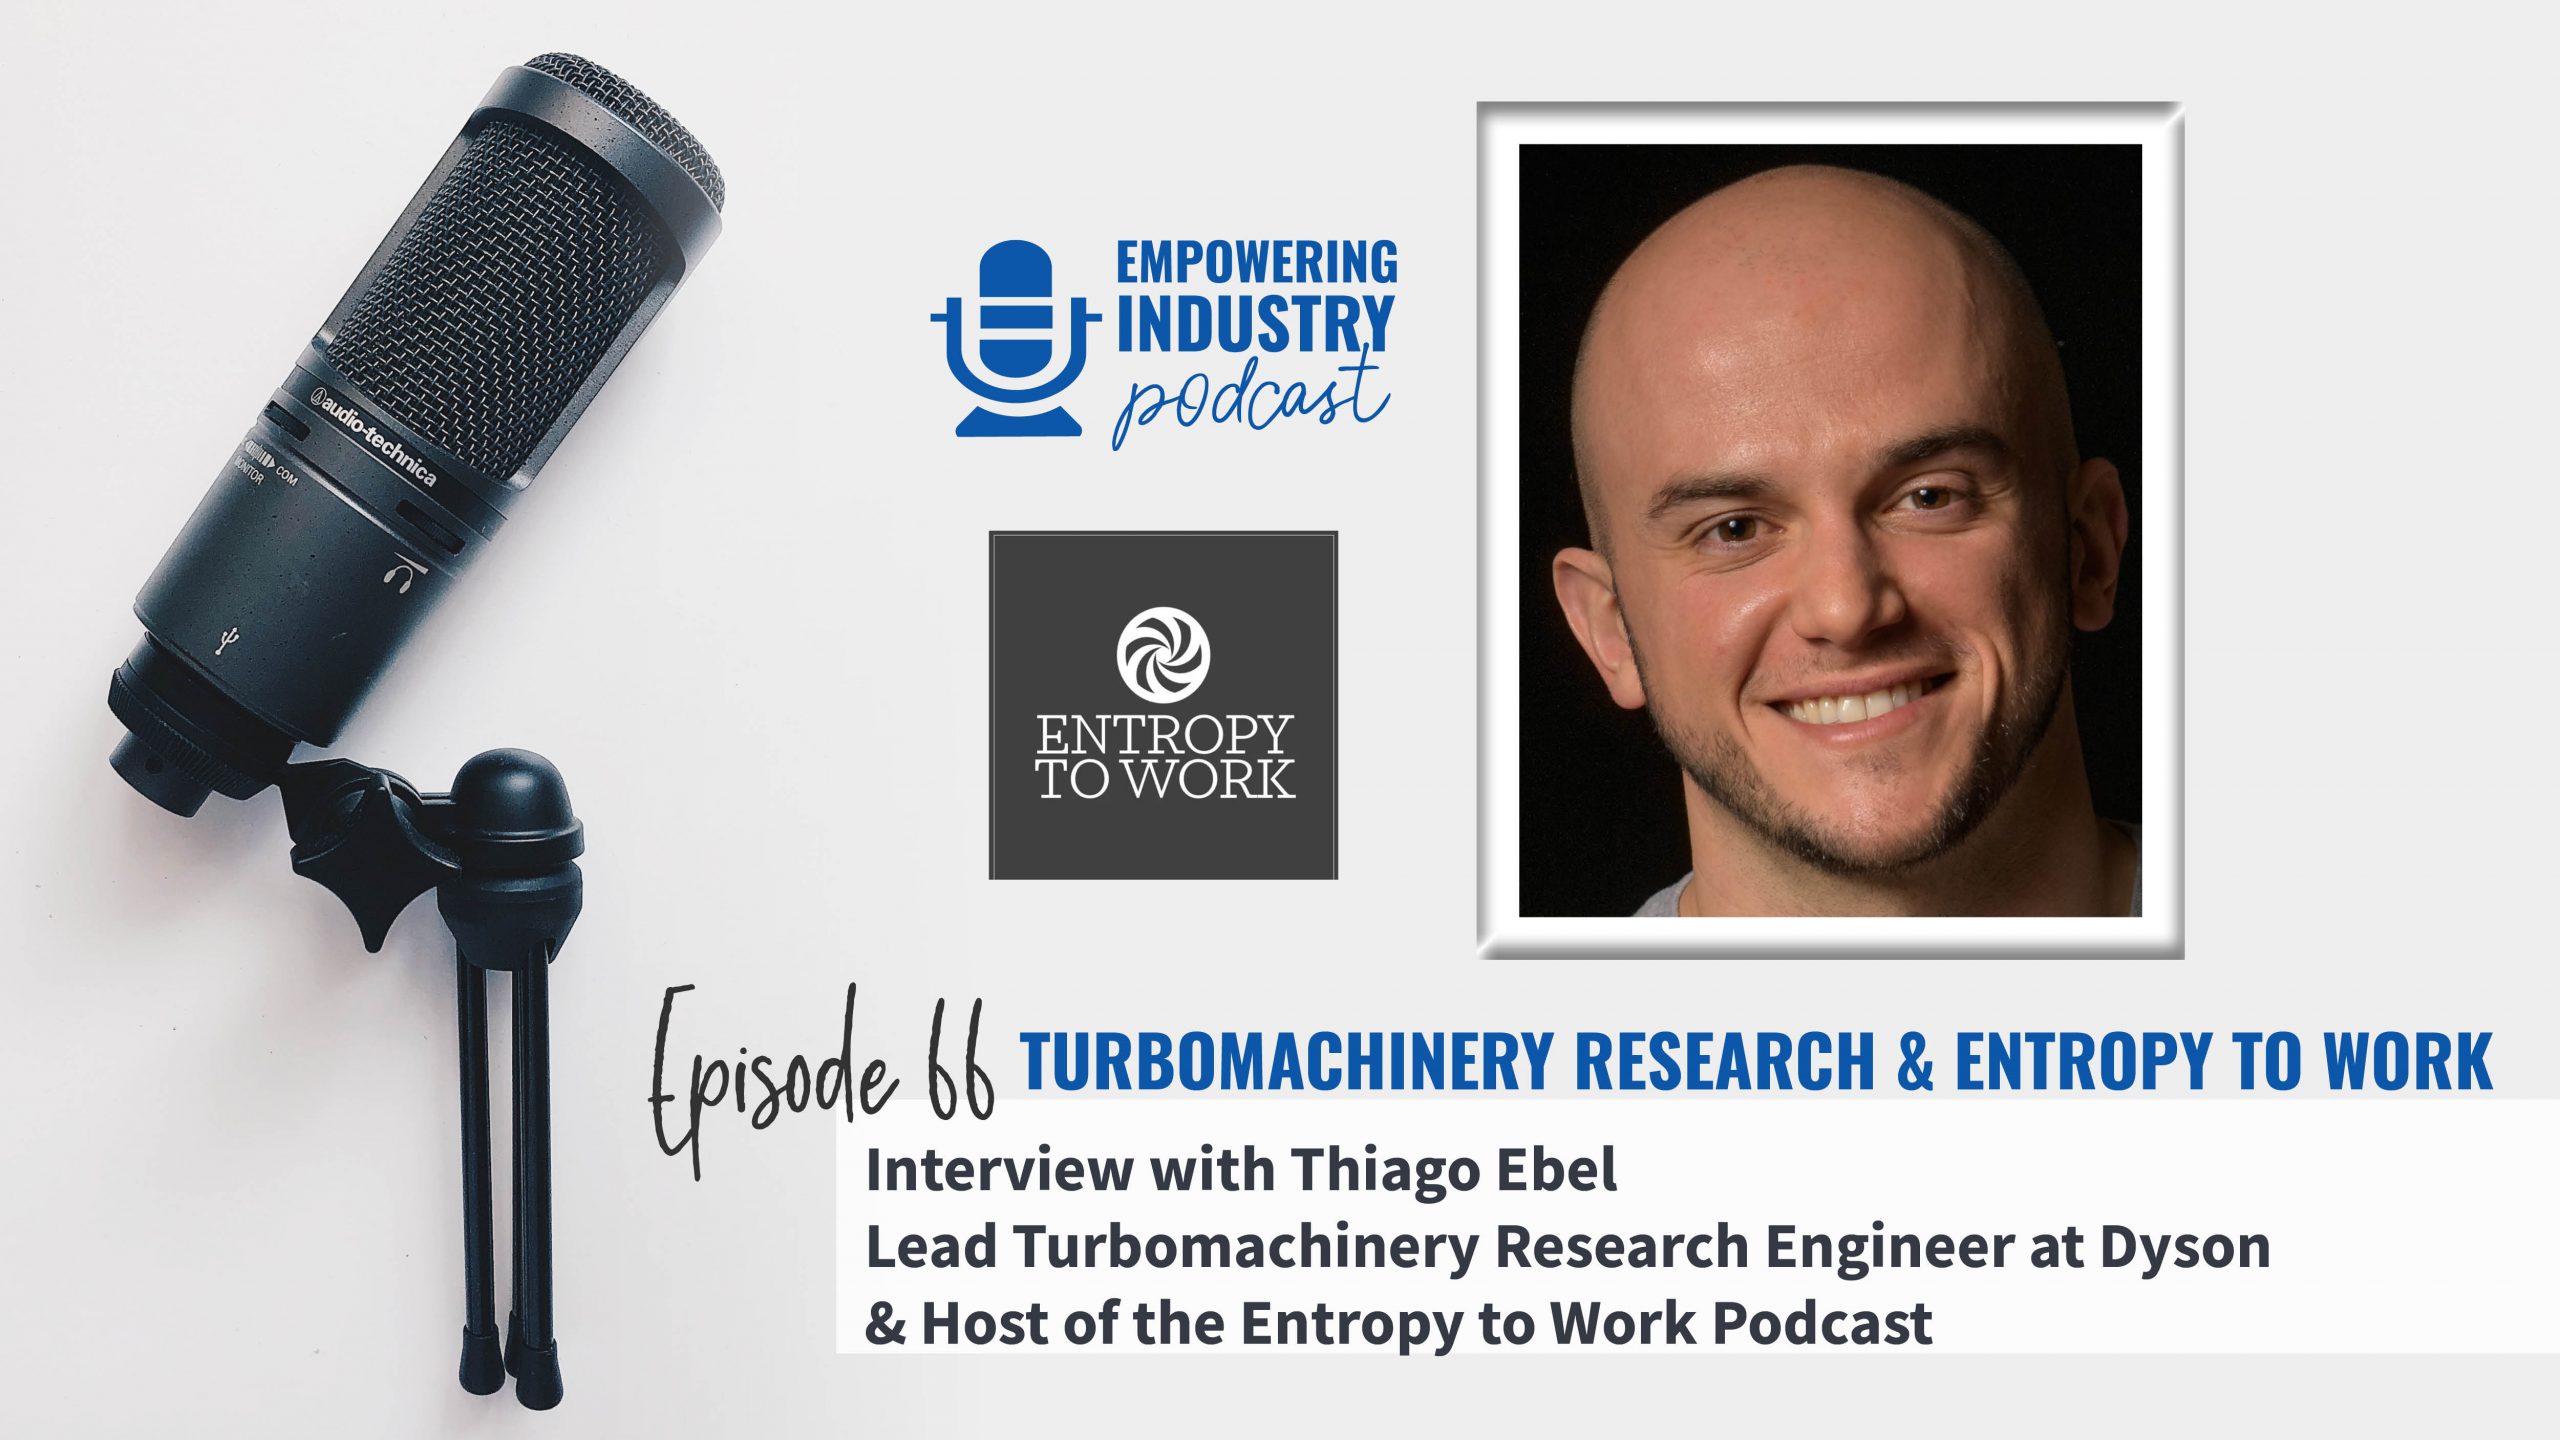 Turbomachinery Research & Entropy to Work with Thiago Ebel